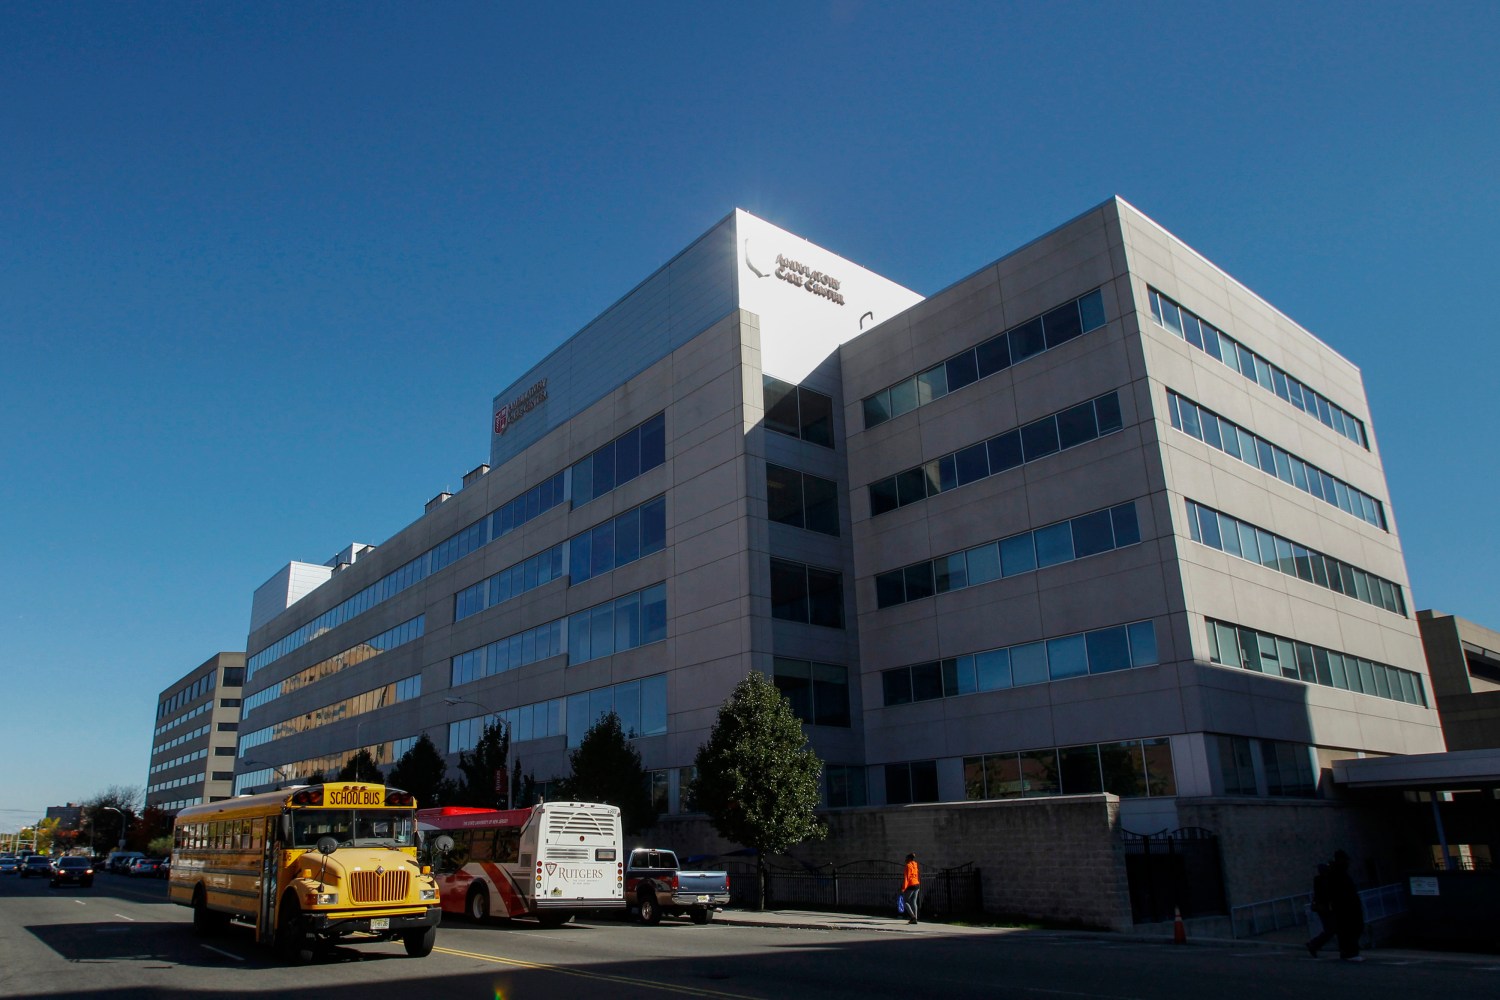 A hospital viewed from street level